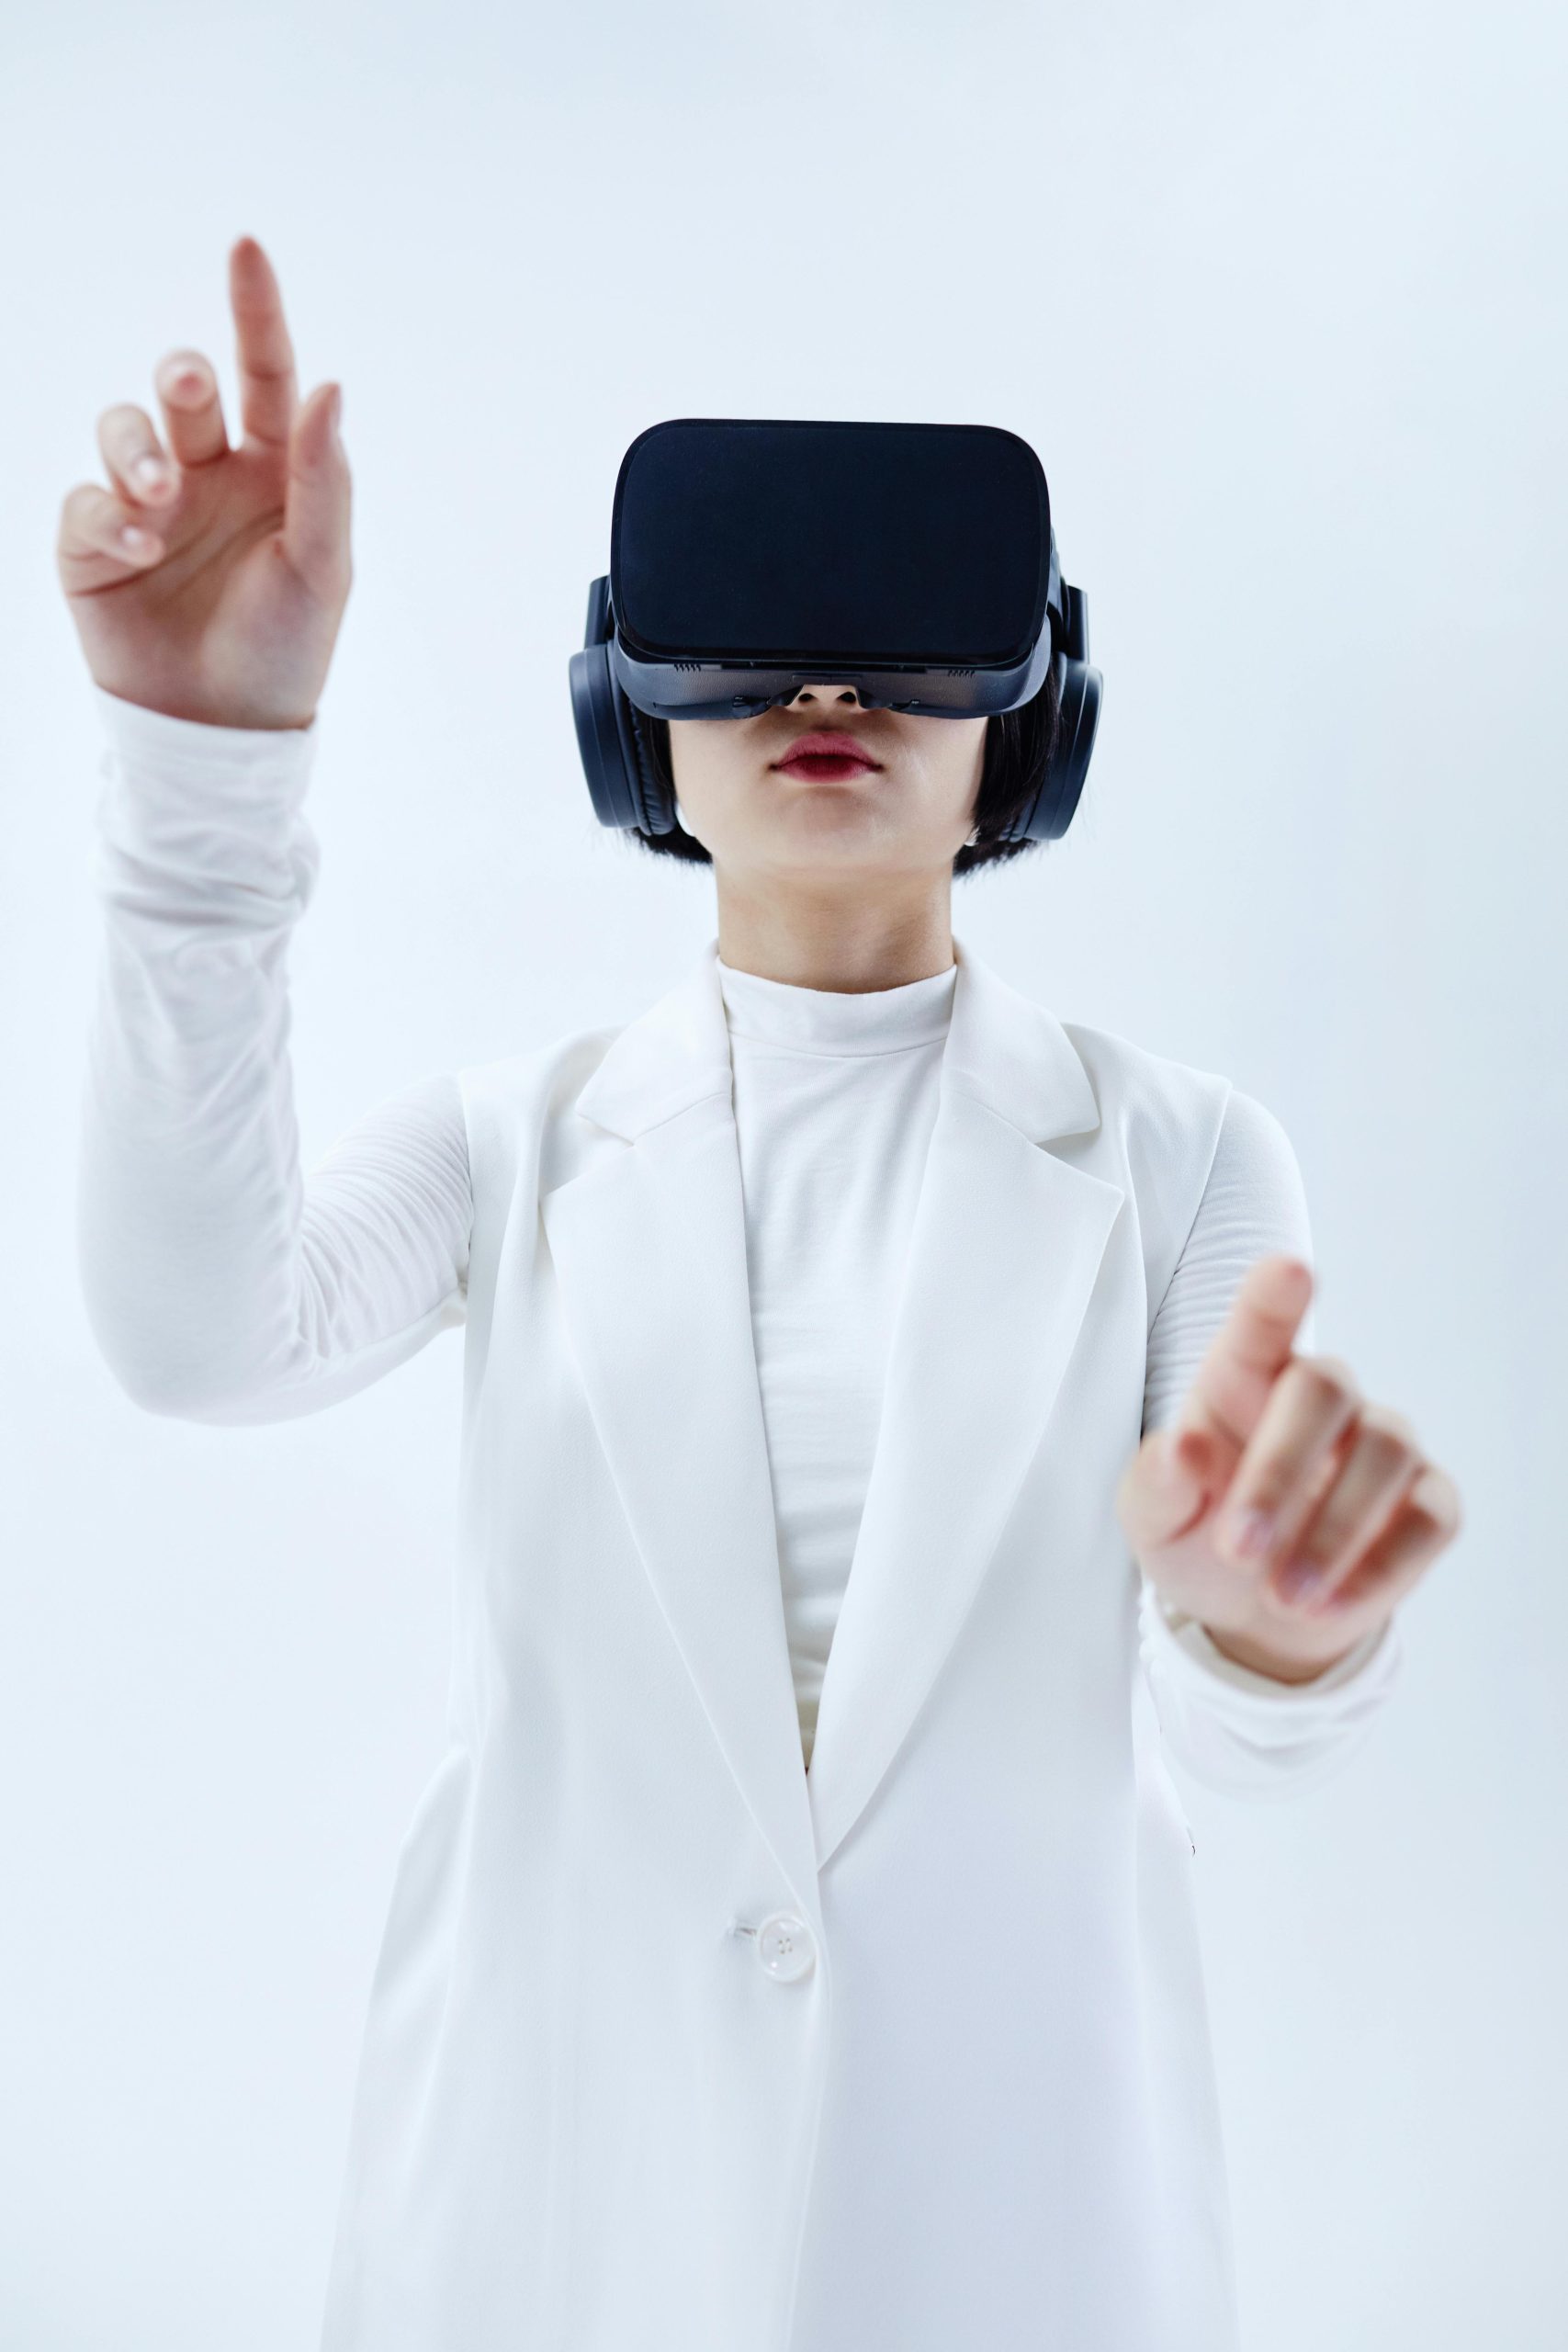 A person wearing a virtual reality headset is experiencing a virtual world.
